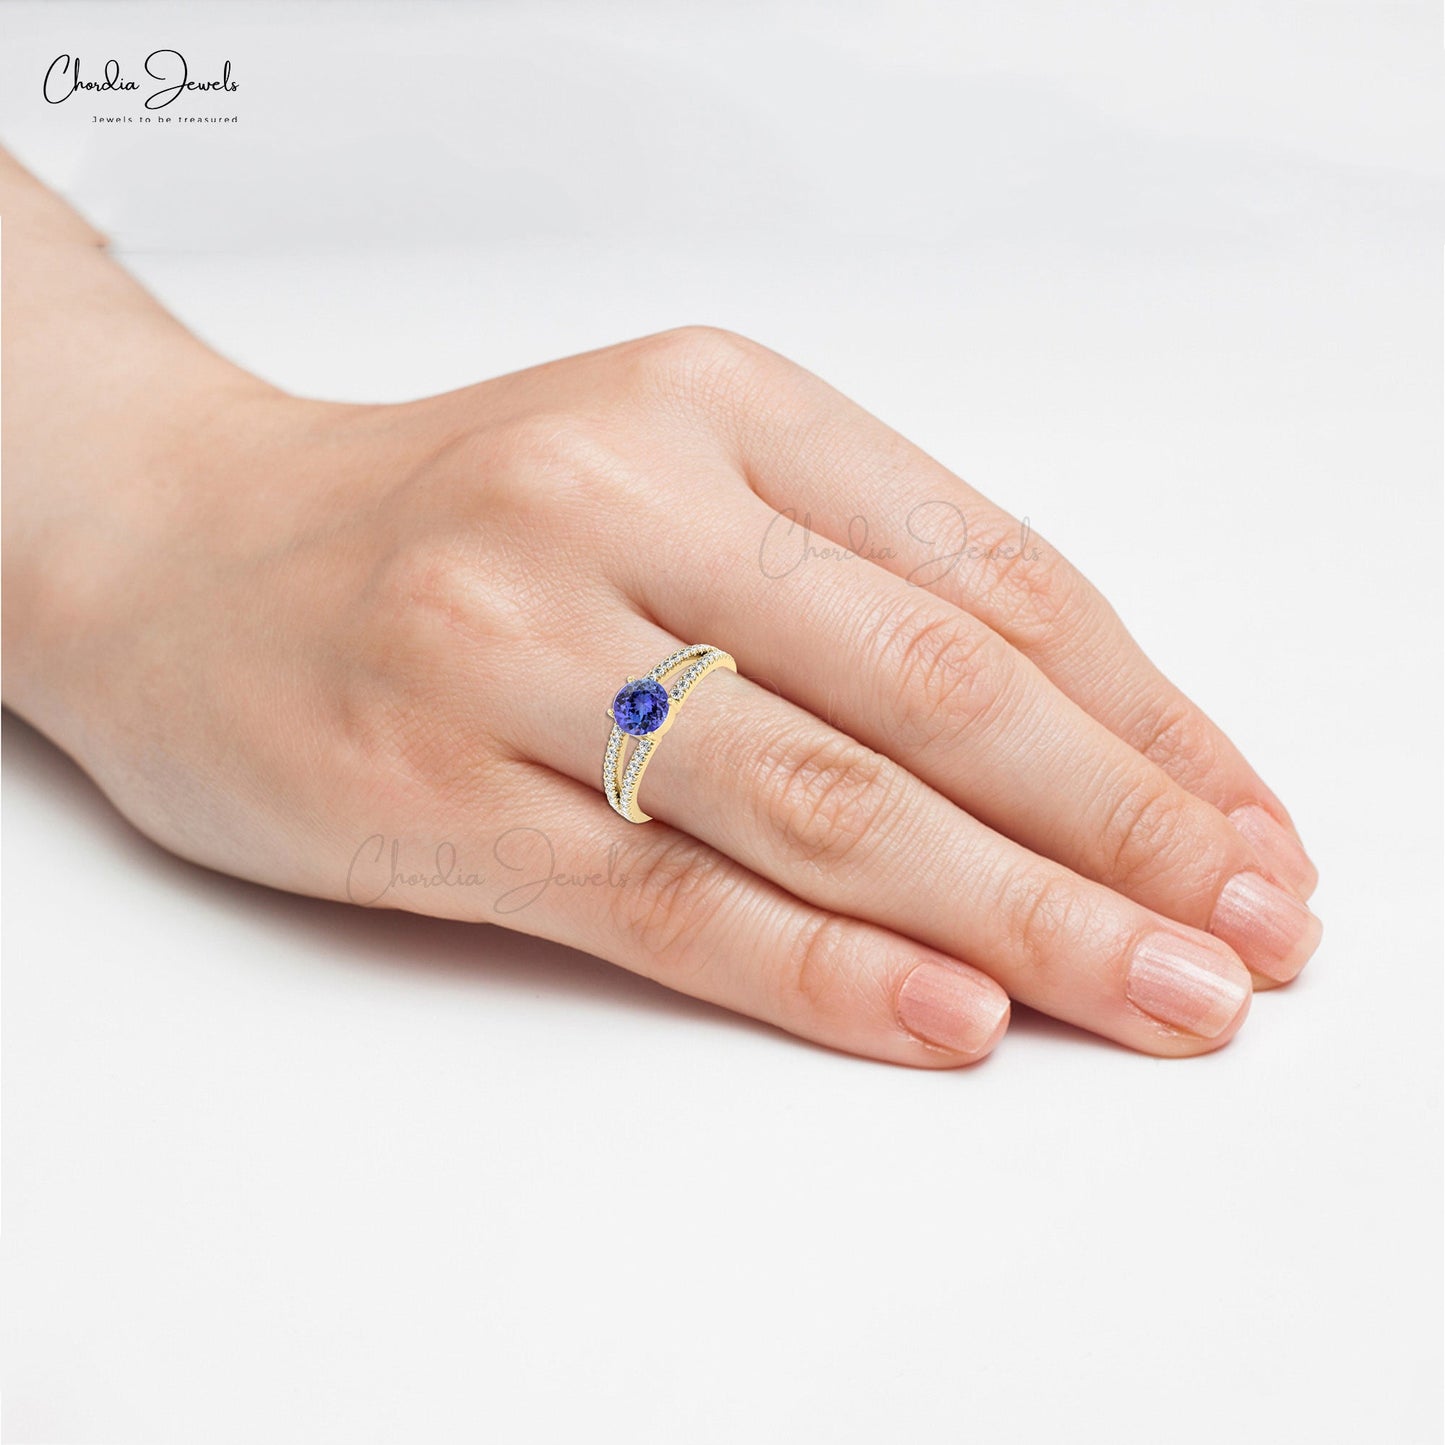 Round Cut Real Tanzanite Ring in 14k Solid Gold for Engagement